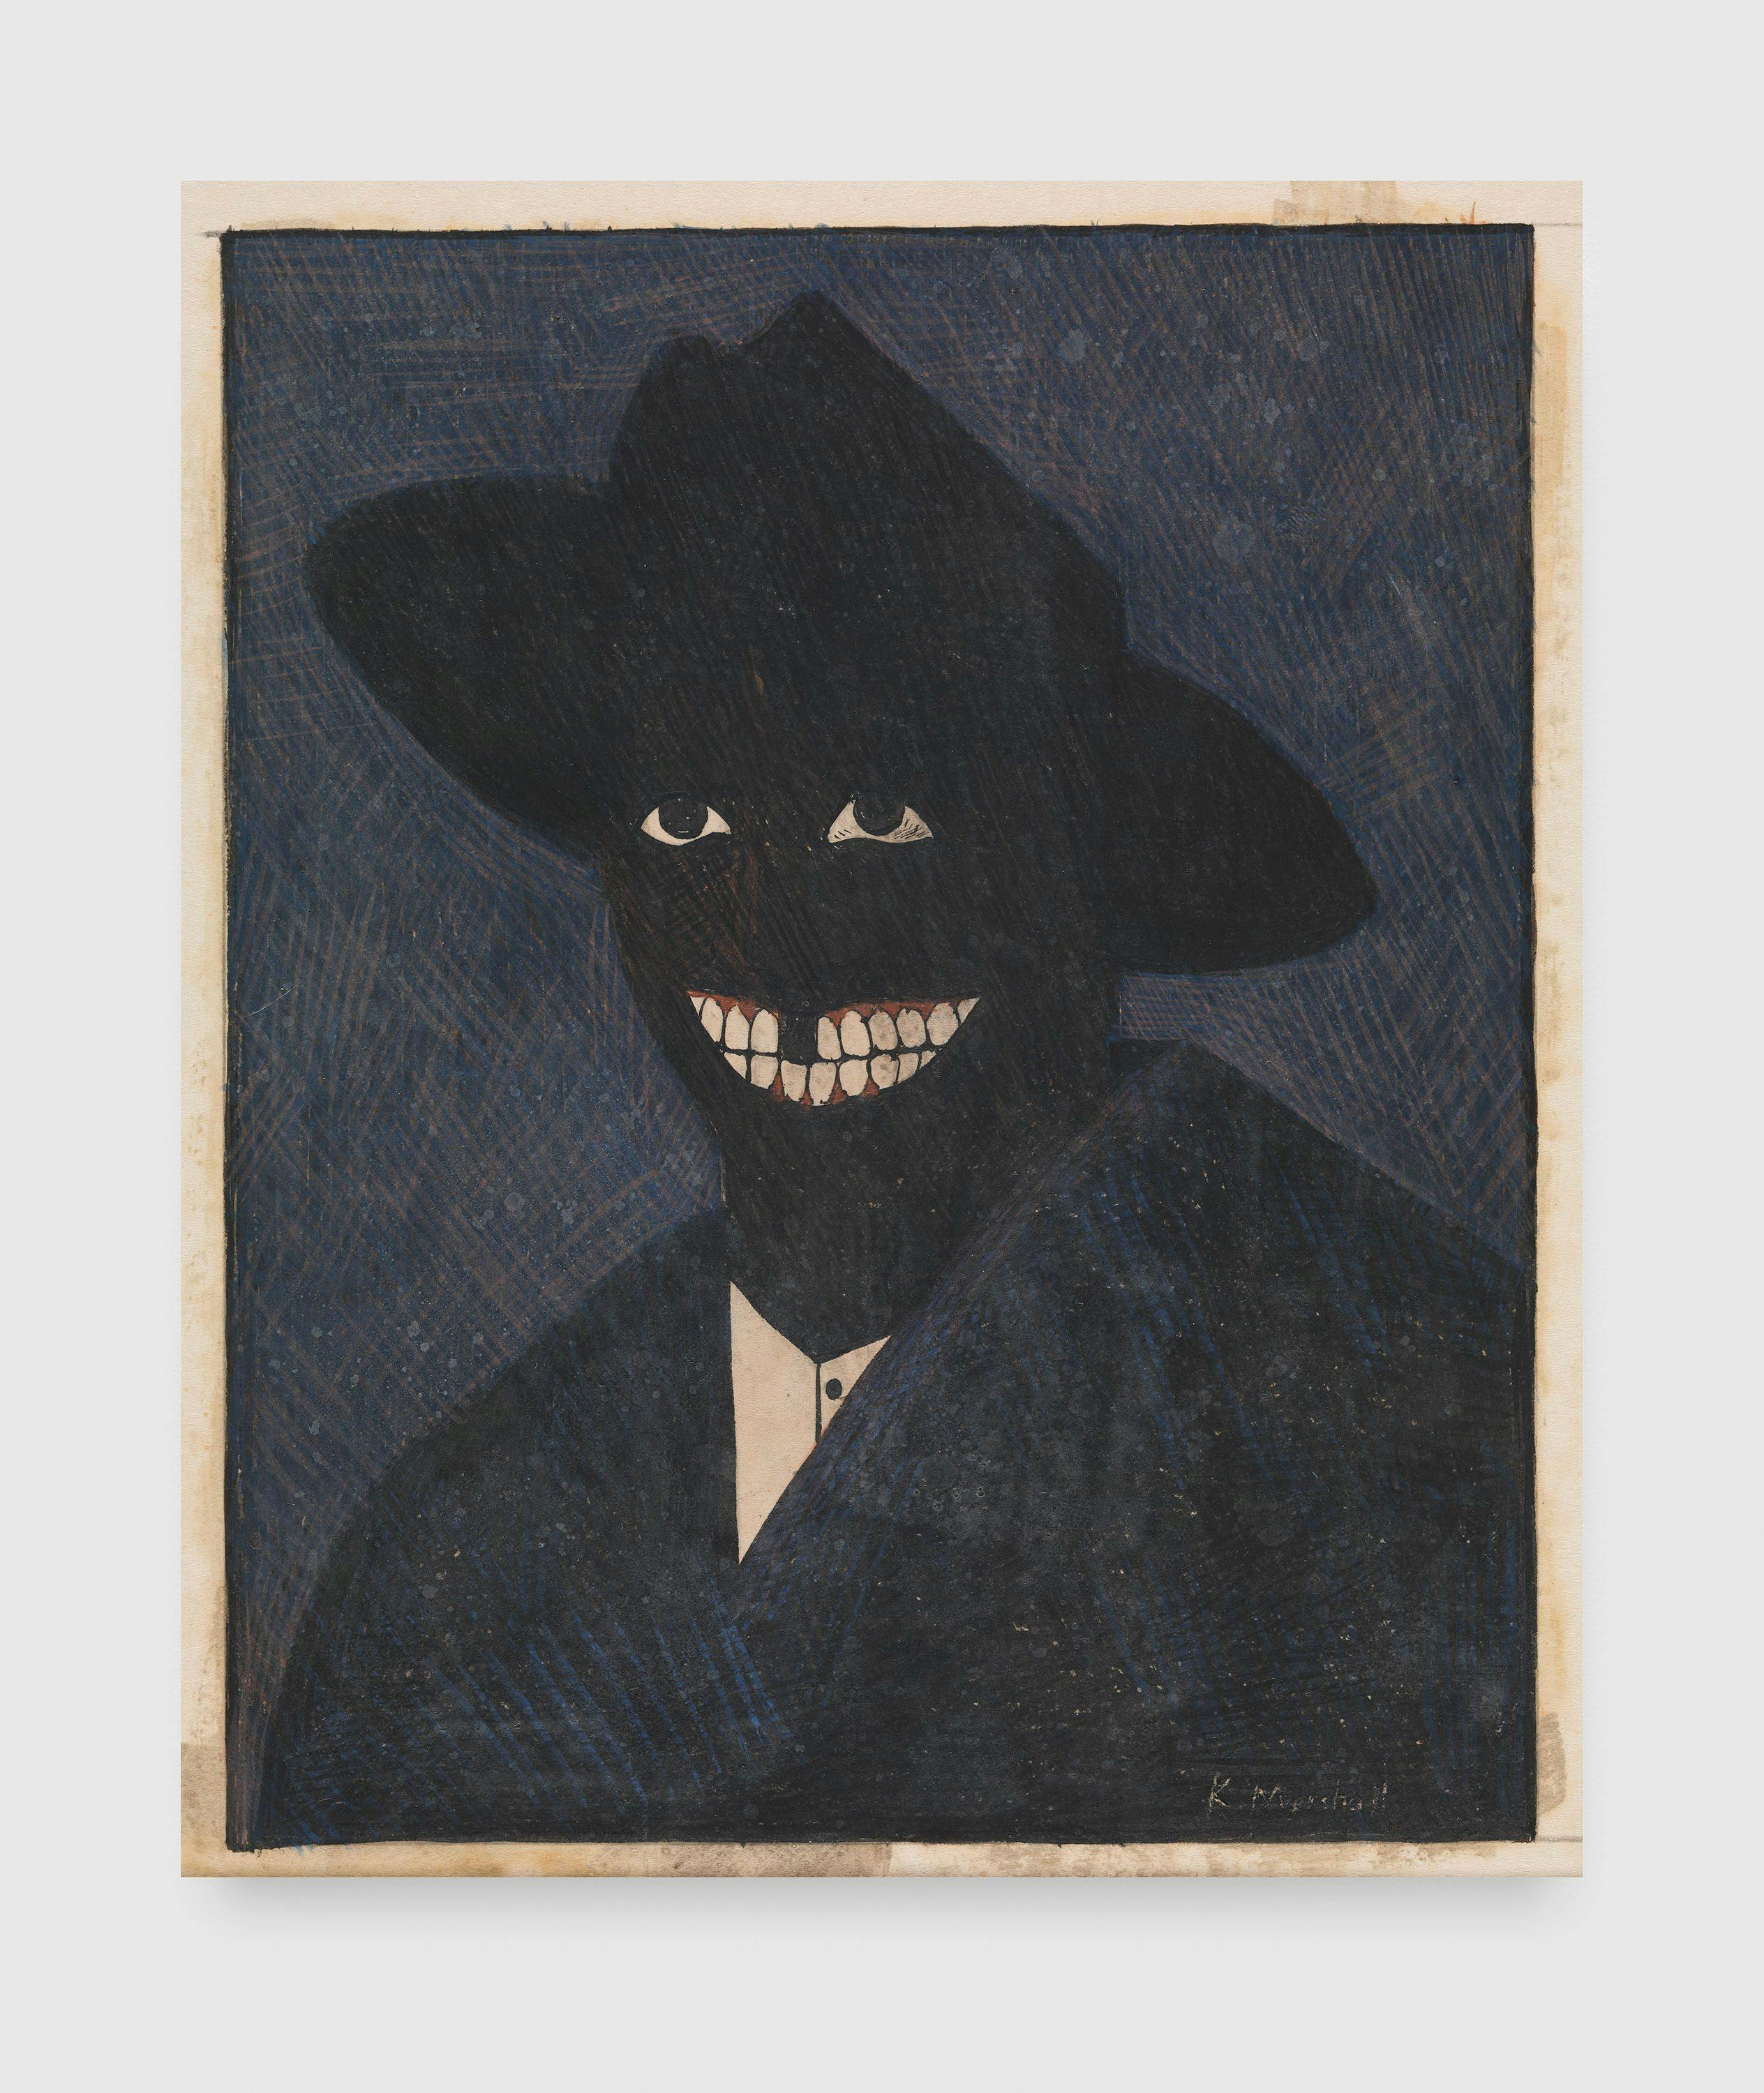 A painting by Kerry James Marshall, titled A Portrait of the Artist as a Shadow of His Former Self, dated 1980.